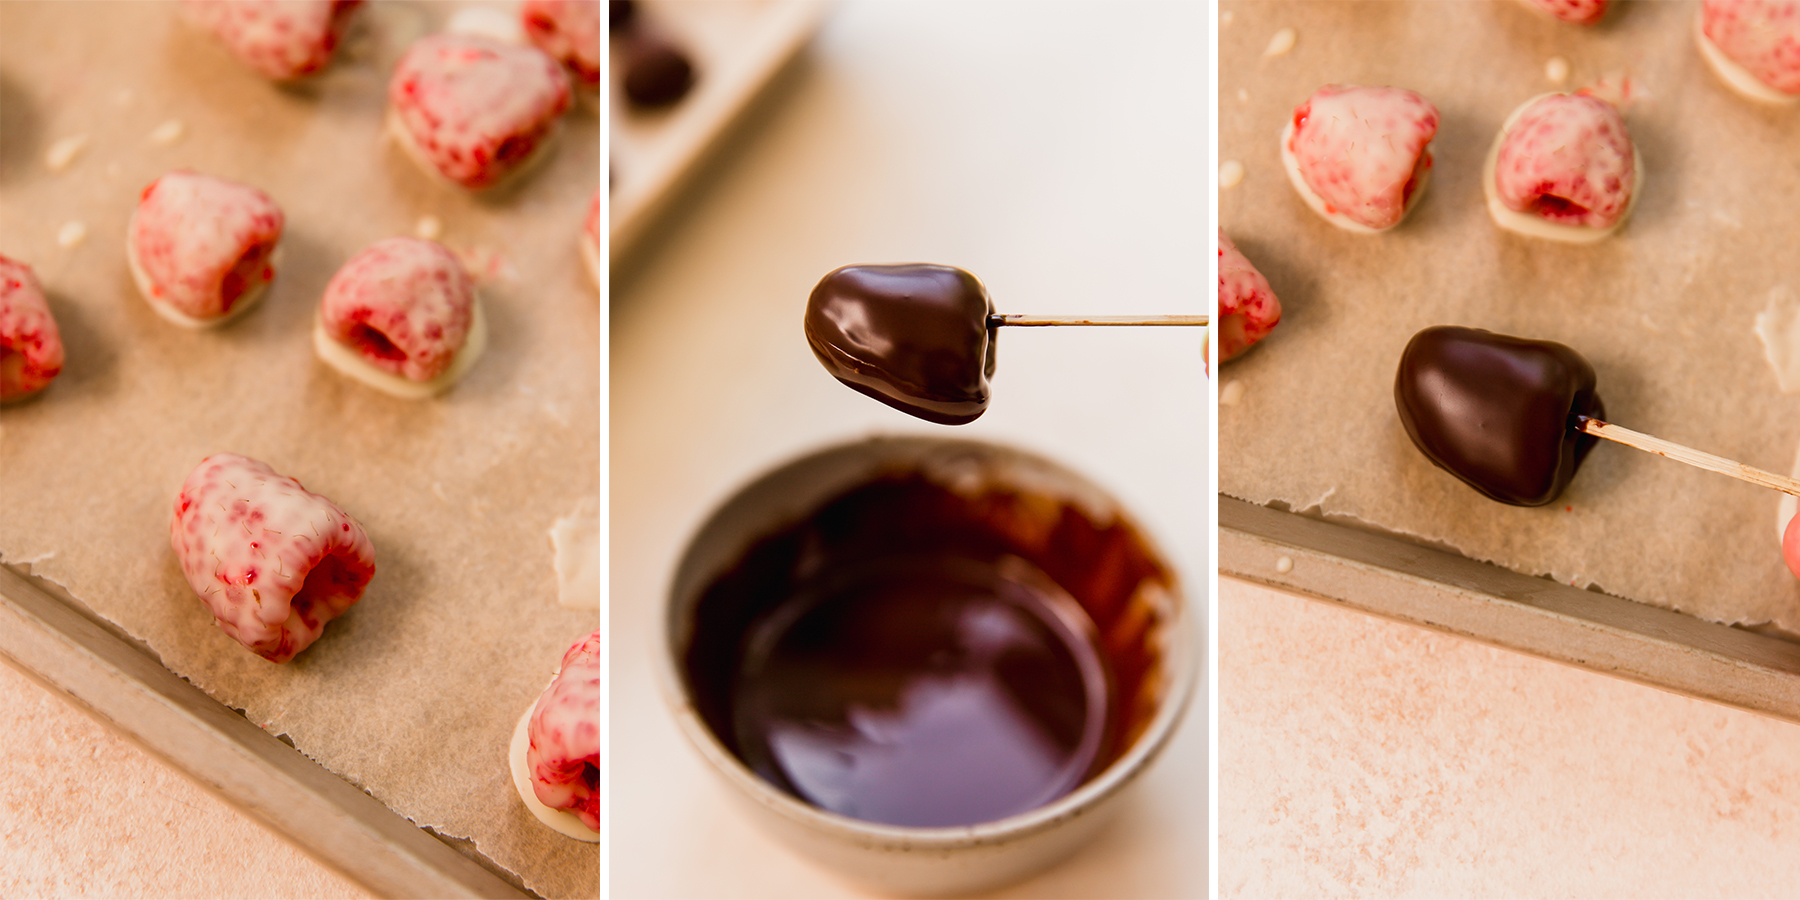 The step-by-step photos of making chocolate frozen raspberries.